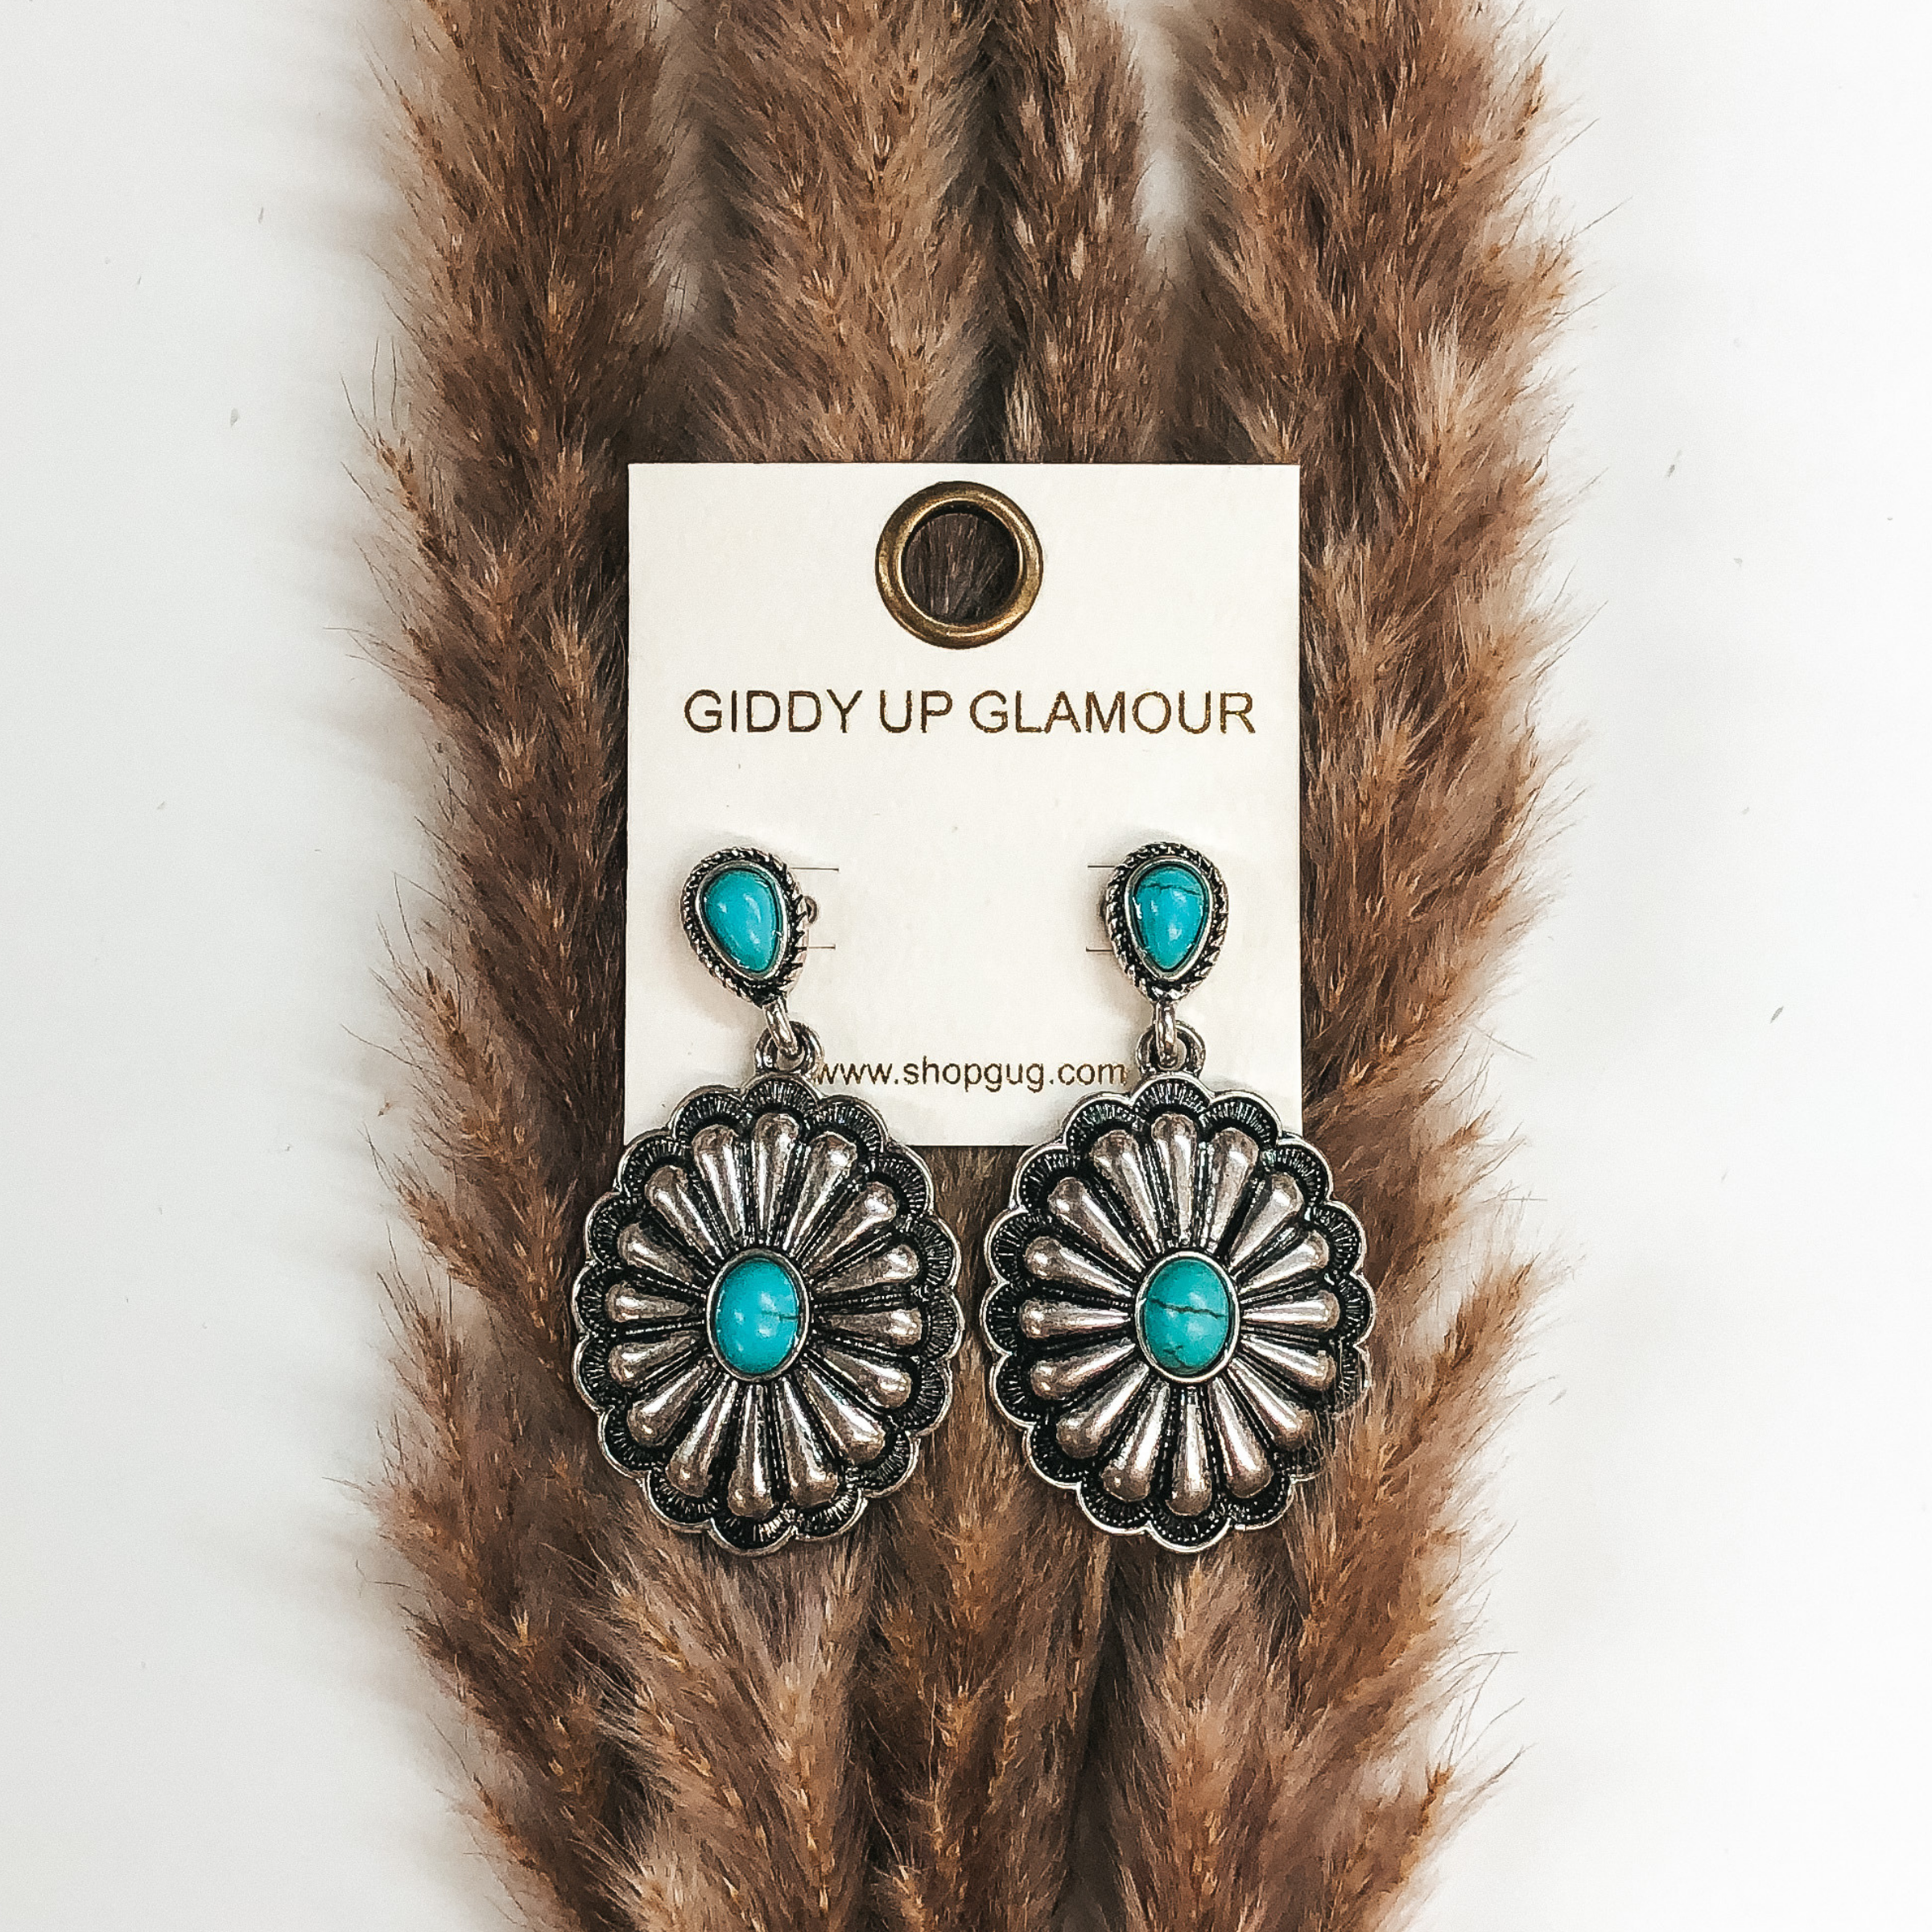 A pair of silver concho earrings with turquoise stones. These earrings are pictured on a white background with a basket and palm leaf.